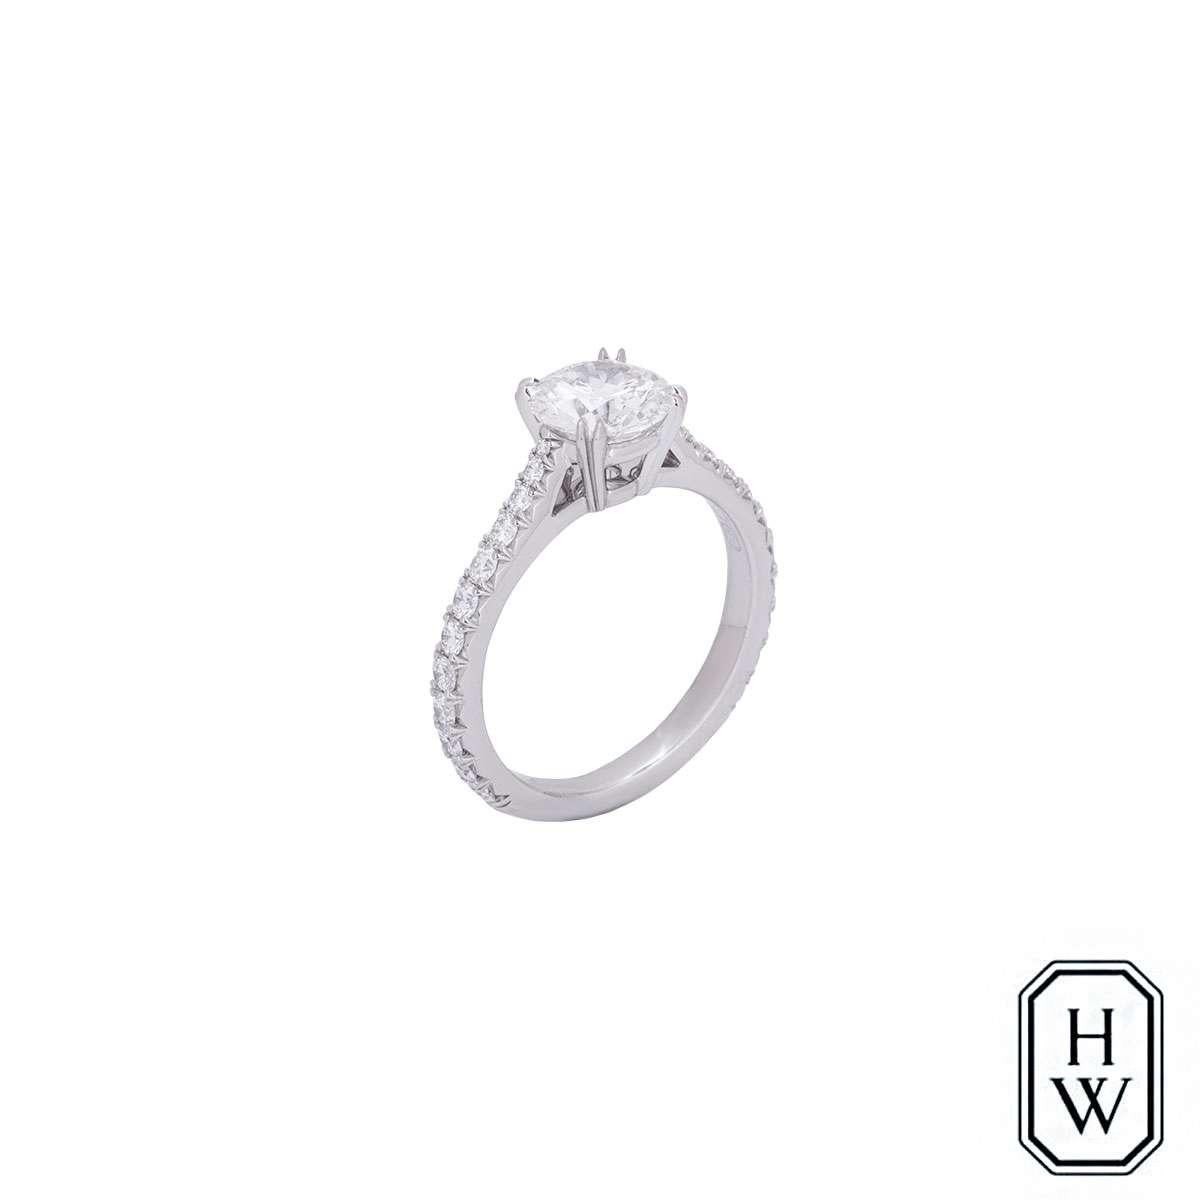 A stunning platinum diamond ring from the Brilliant Love collection by Harry Winston. The central double claw set diamond weighs 1.09ct, is E colour, VS1 in clarity and scores an excellent rating in all three aspects for cut, polish and symmetry -